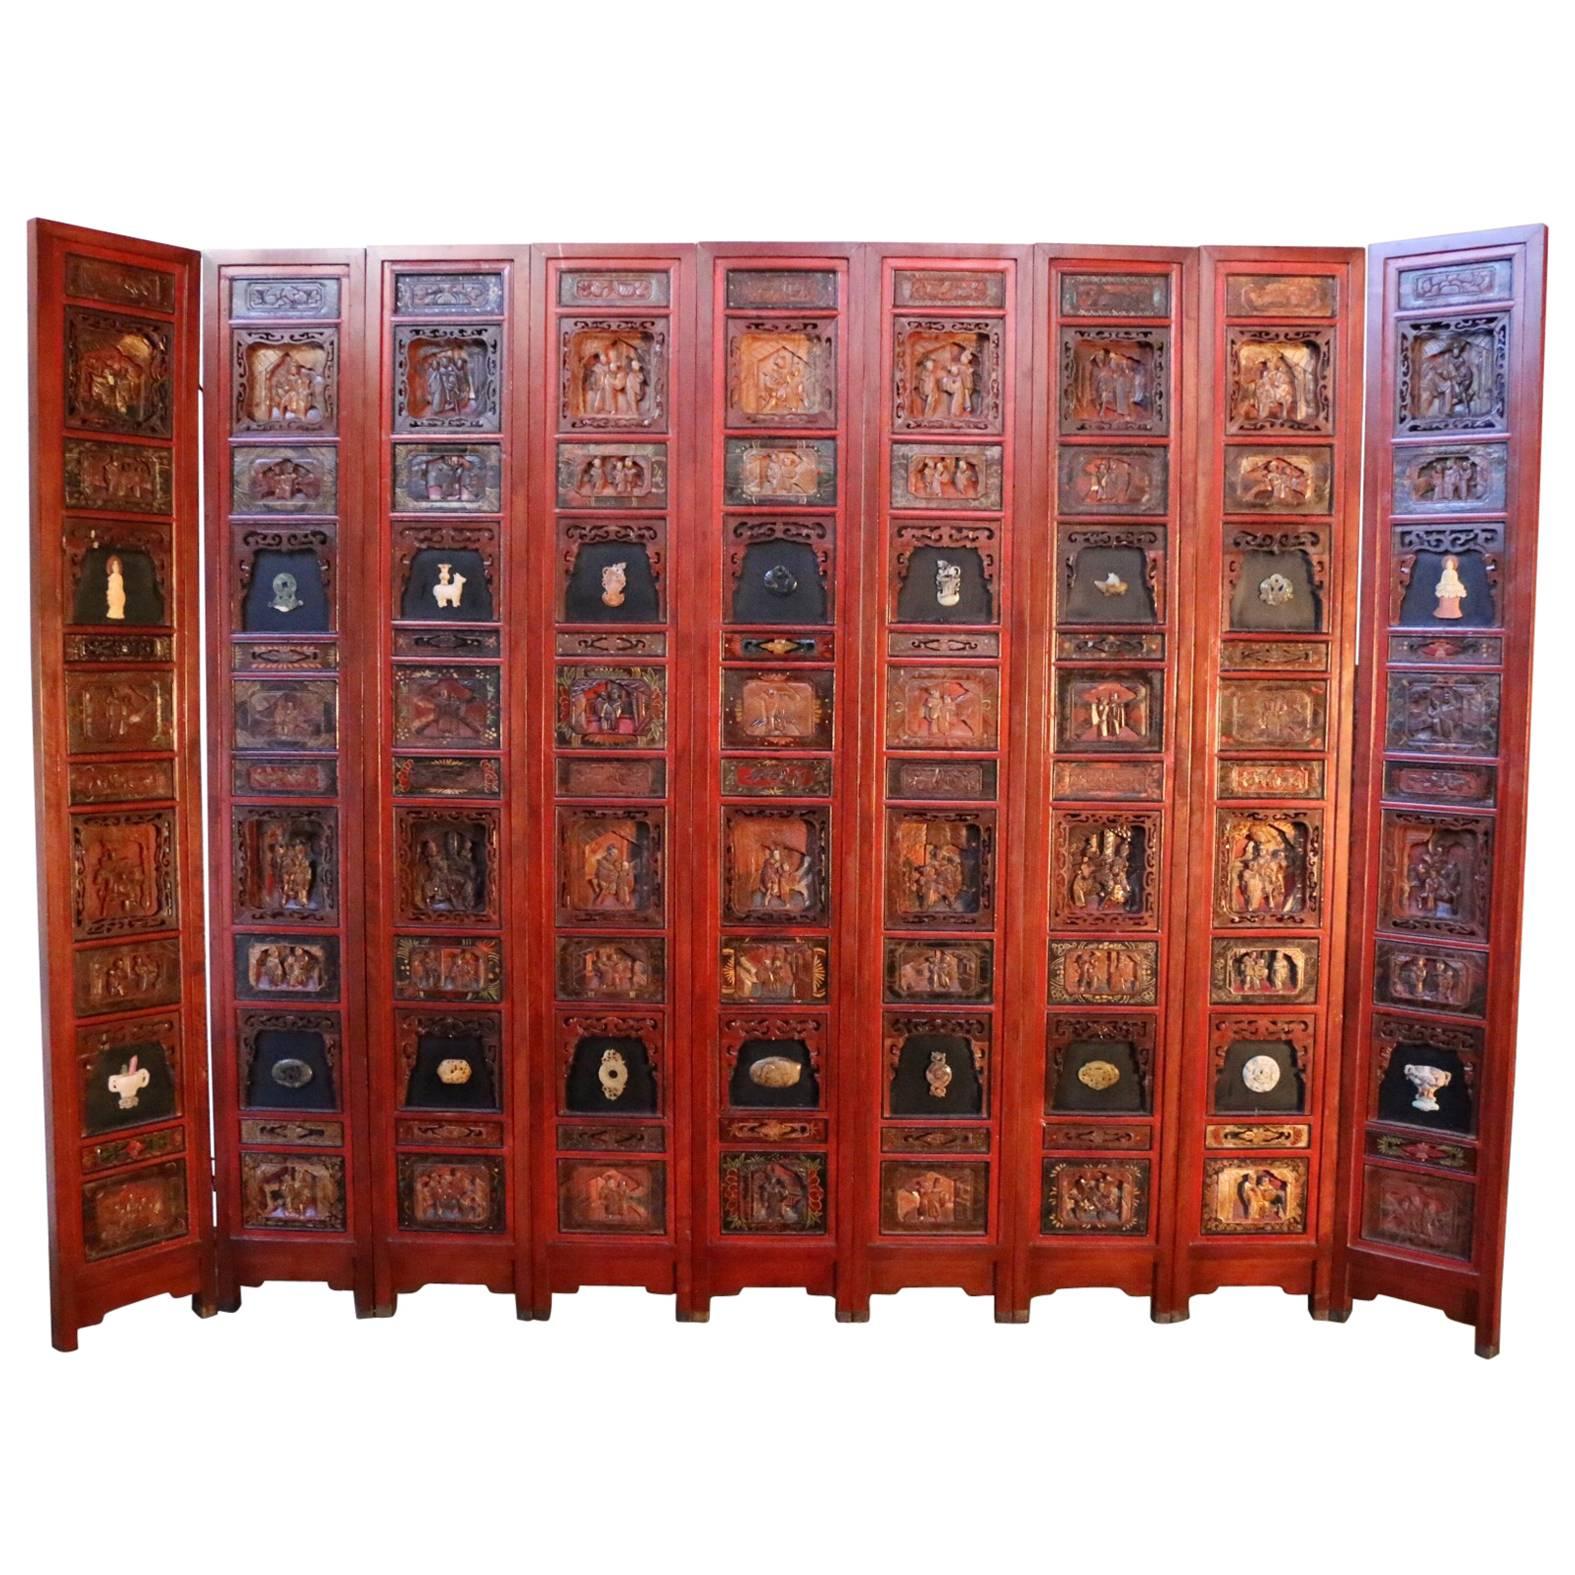 Chinese Carved Lacquered Wood Inset with Hard Stones Nine-Panel Floor Screen